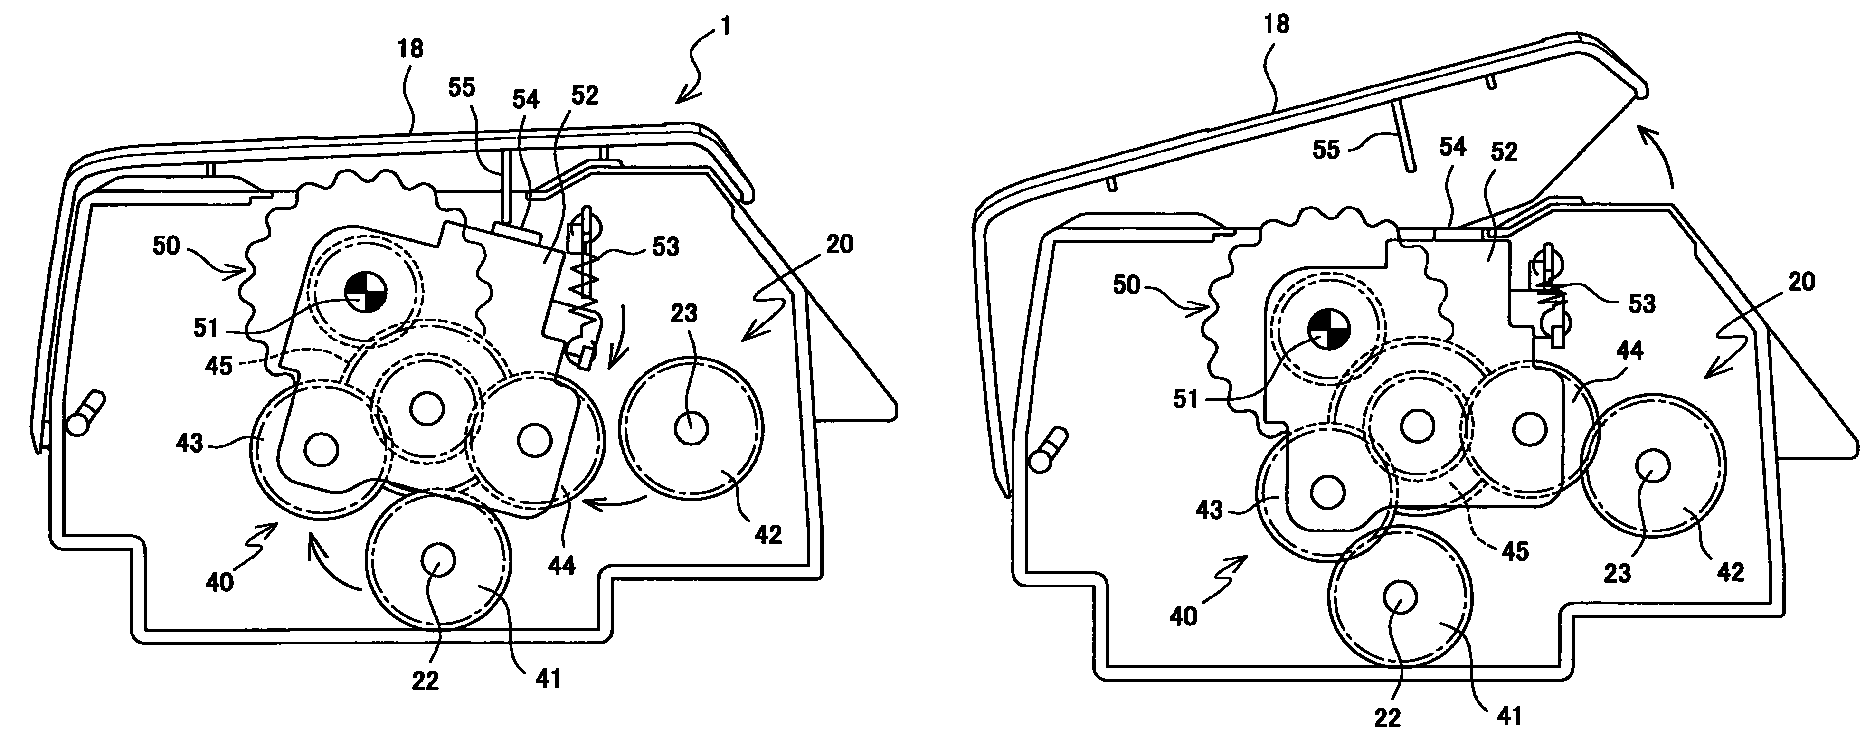 Sheet transport apparatus with jam clearing dial